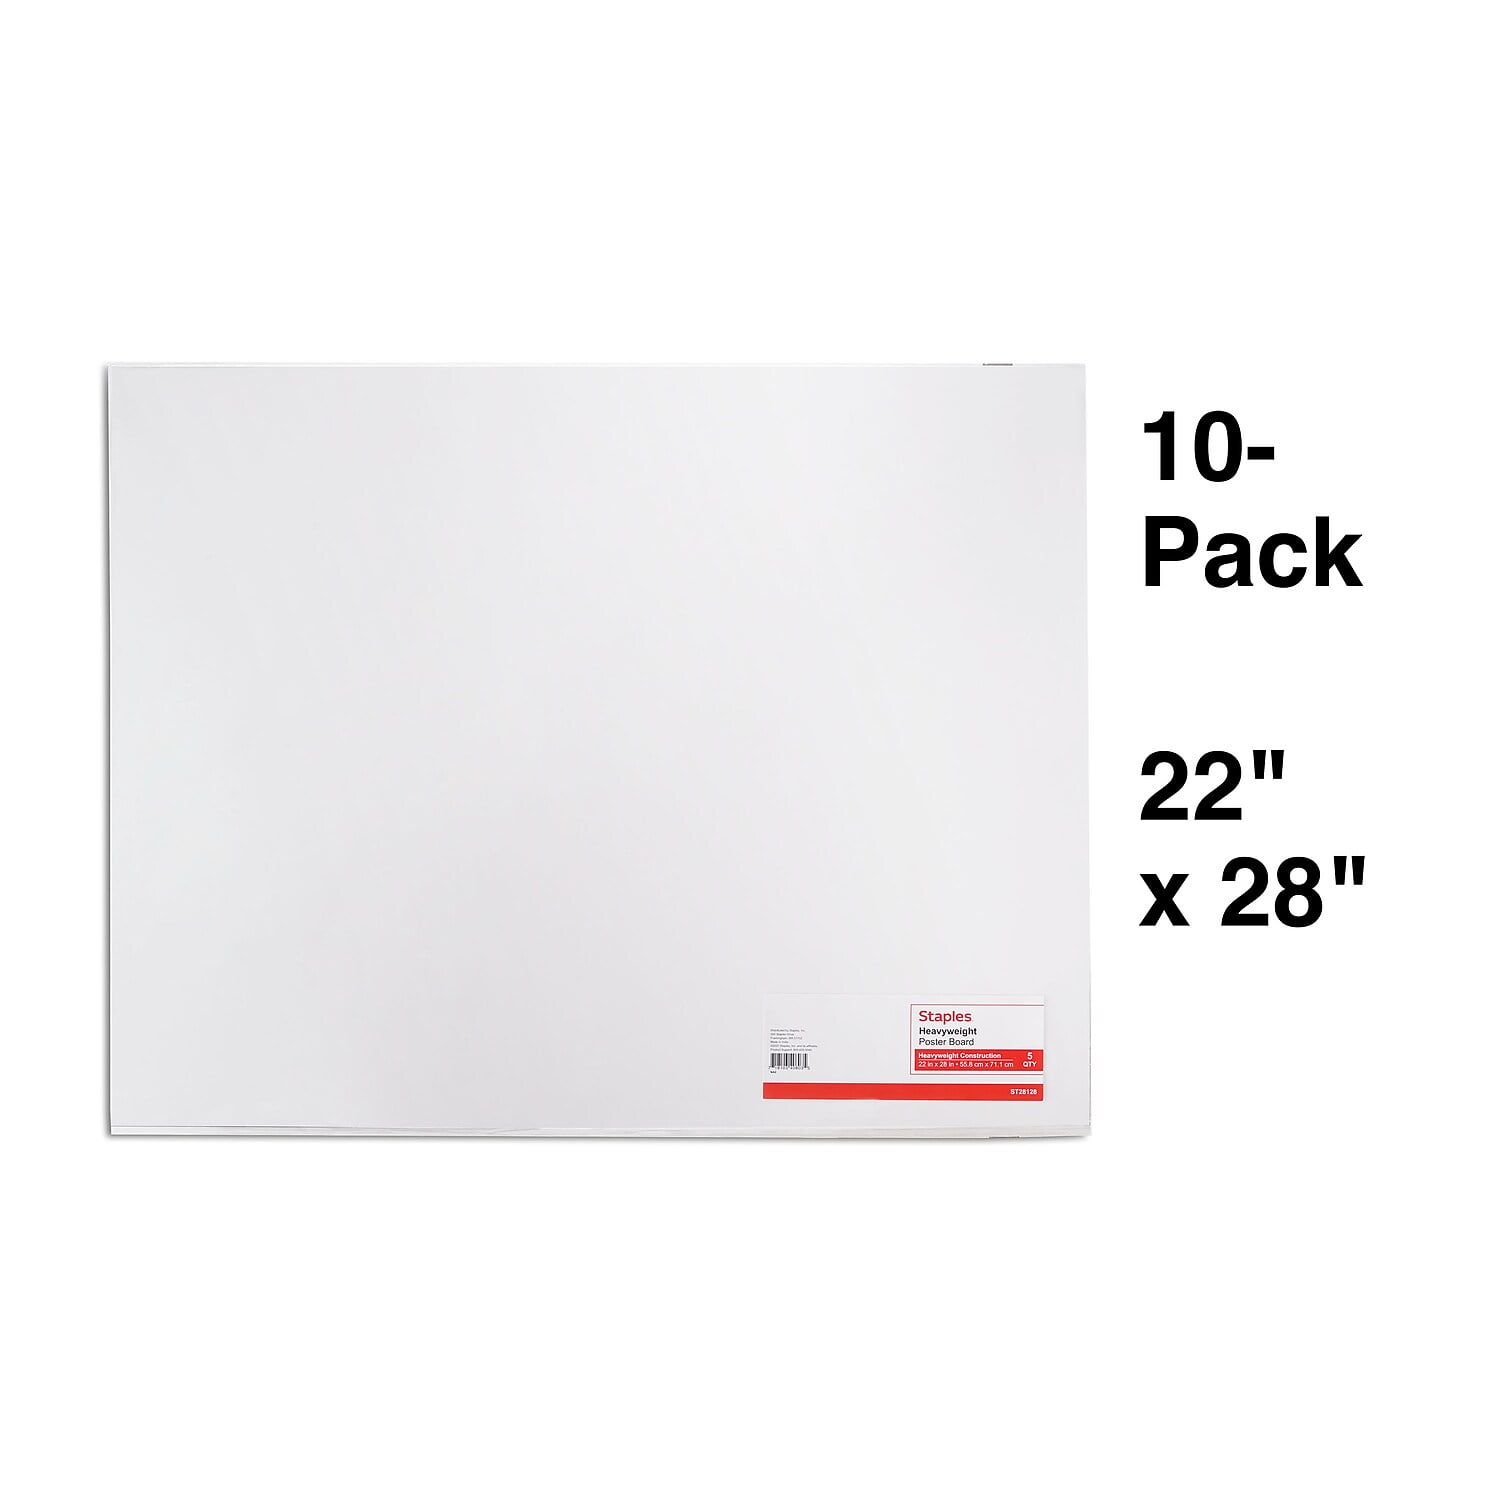 Primary Colors Heavyweight Poster Board, 22x28 5/pack, 10 packs